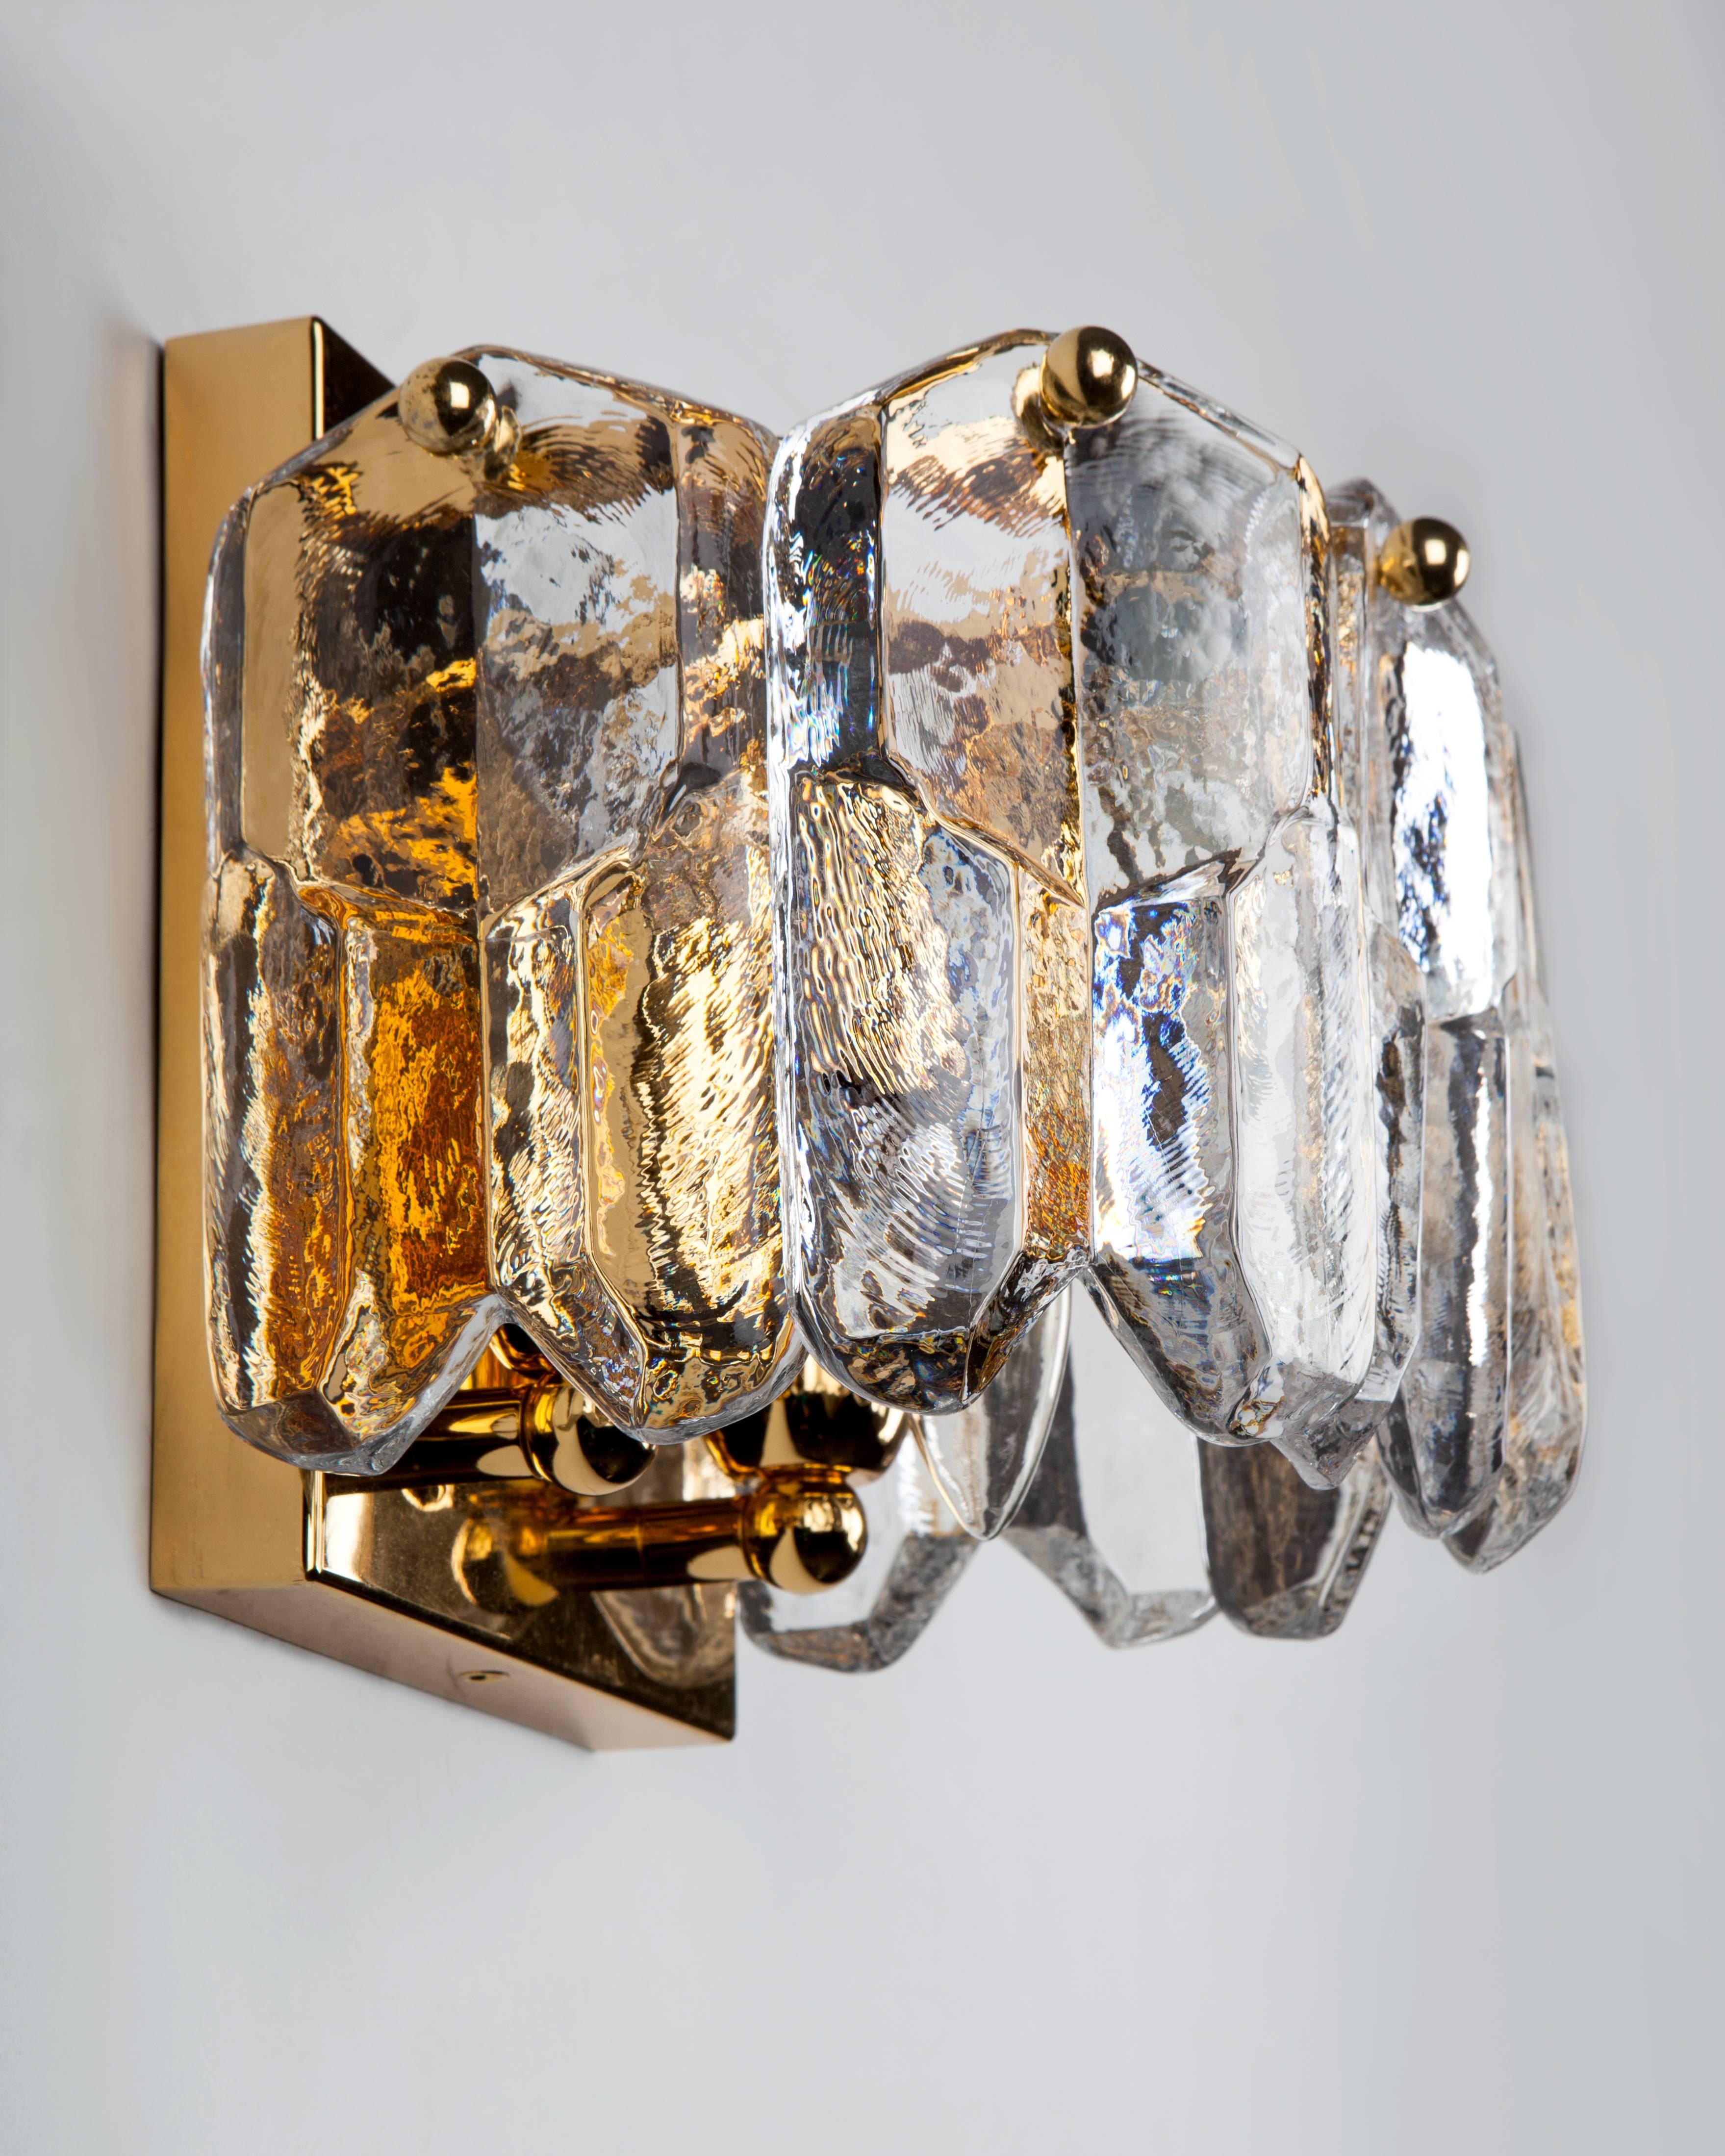 AIS2974
A pair of vintage sconces with thick cast glass ice style crystal prisms held on gilded metal frames. Signed by the Austrian maker Kalmar. Due to the antique nature of this fixture, there may be some nicks or imperfections in the